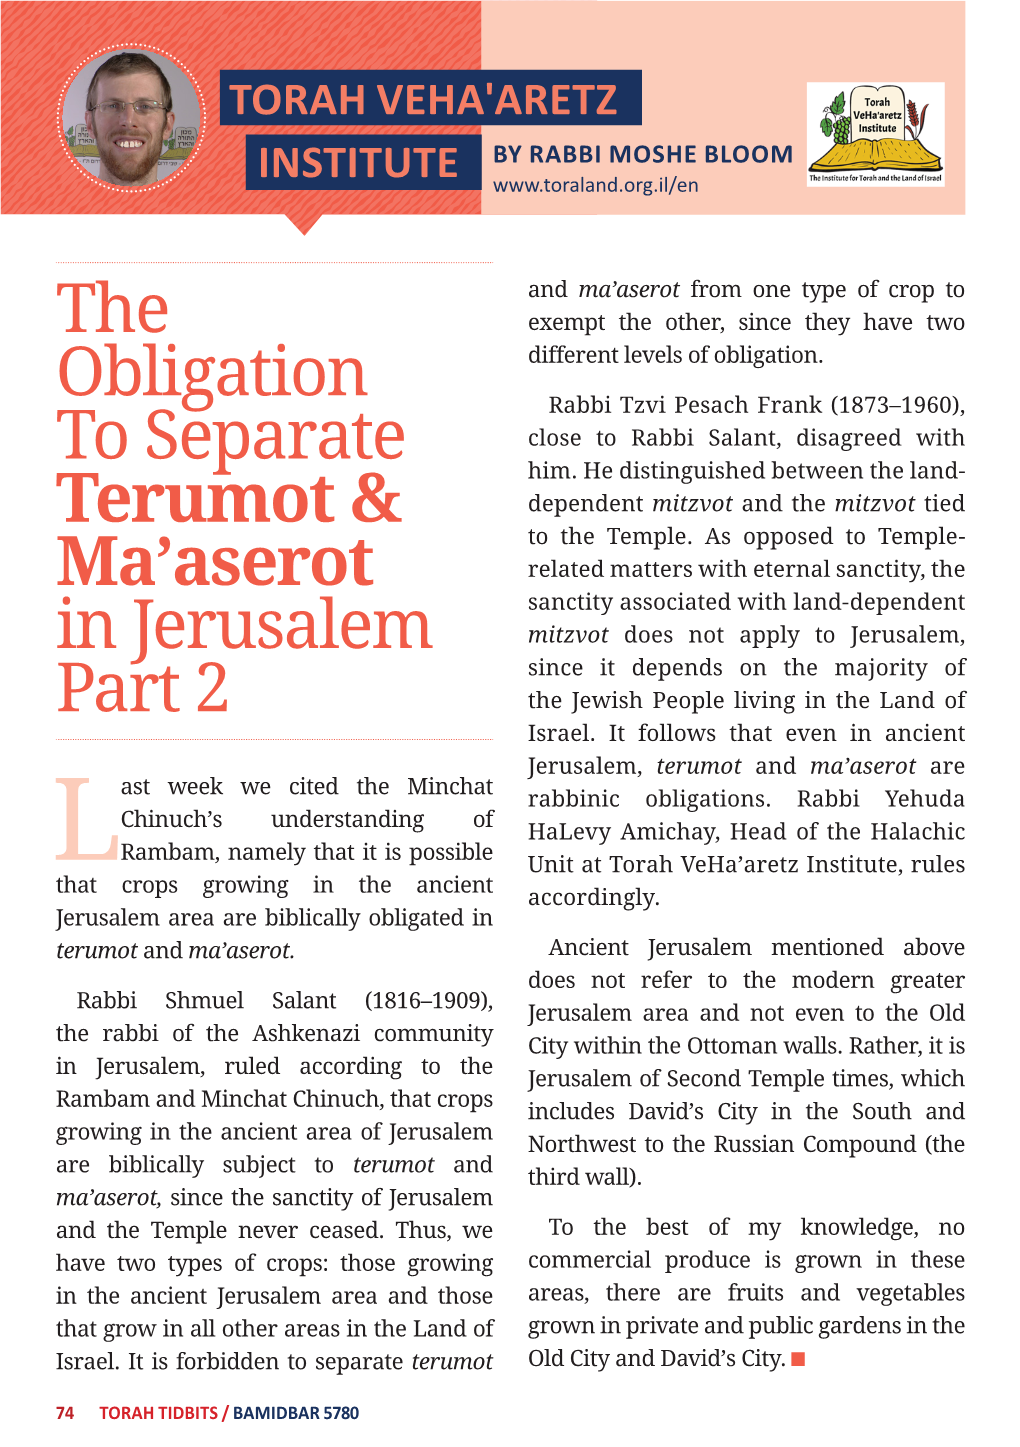 The Obligation to Separate Terumot & Ma'aserot in Jerusalem Part 2